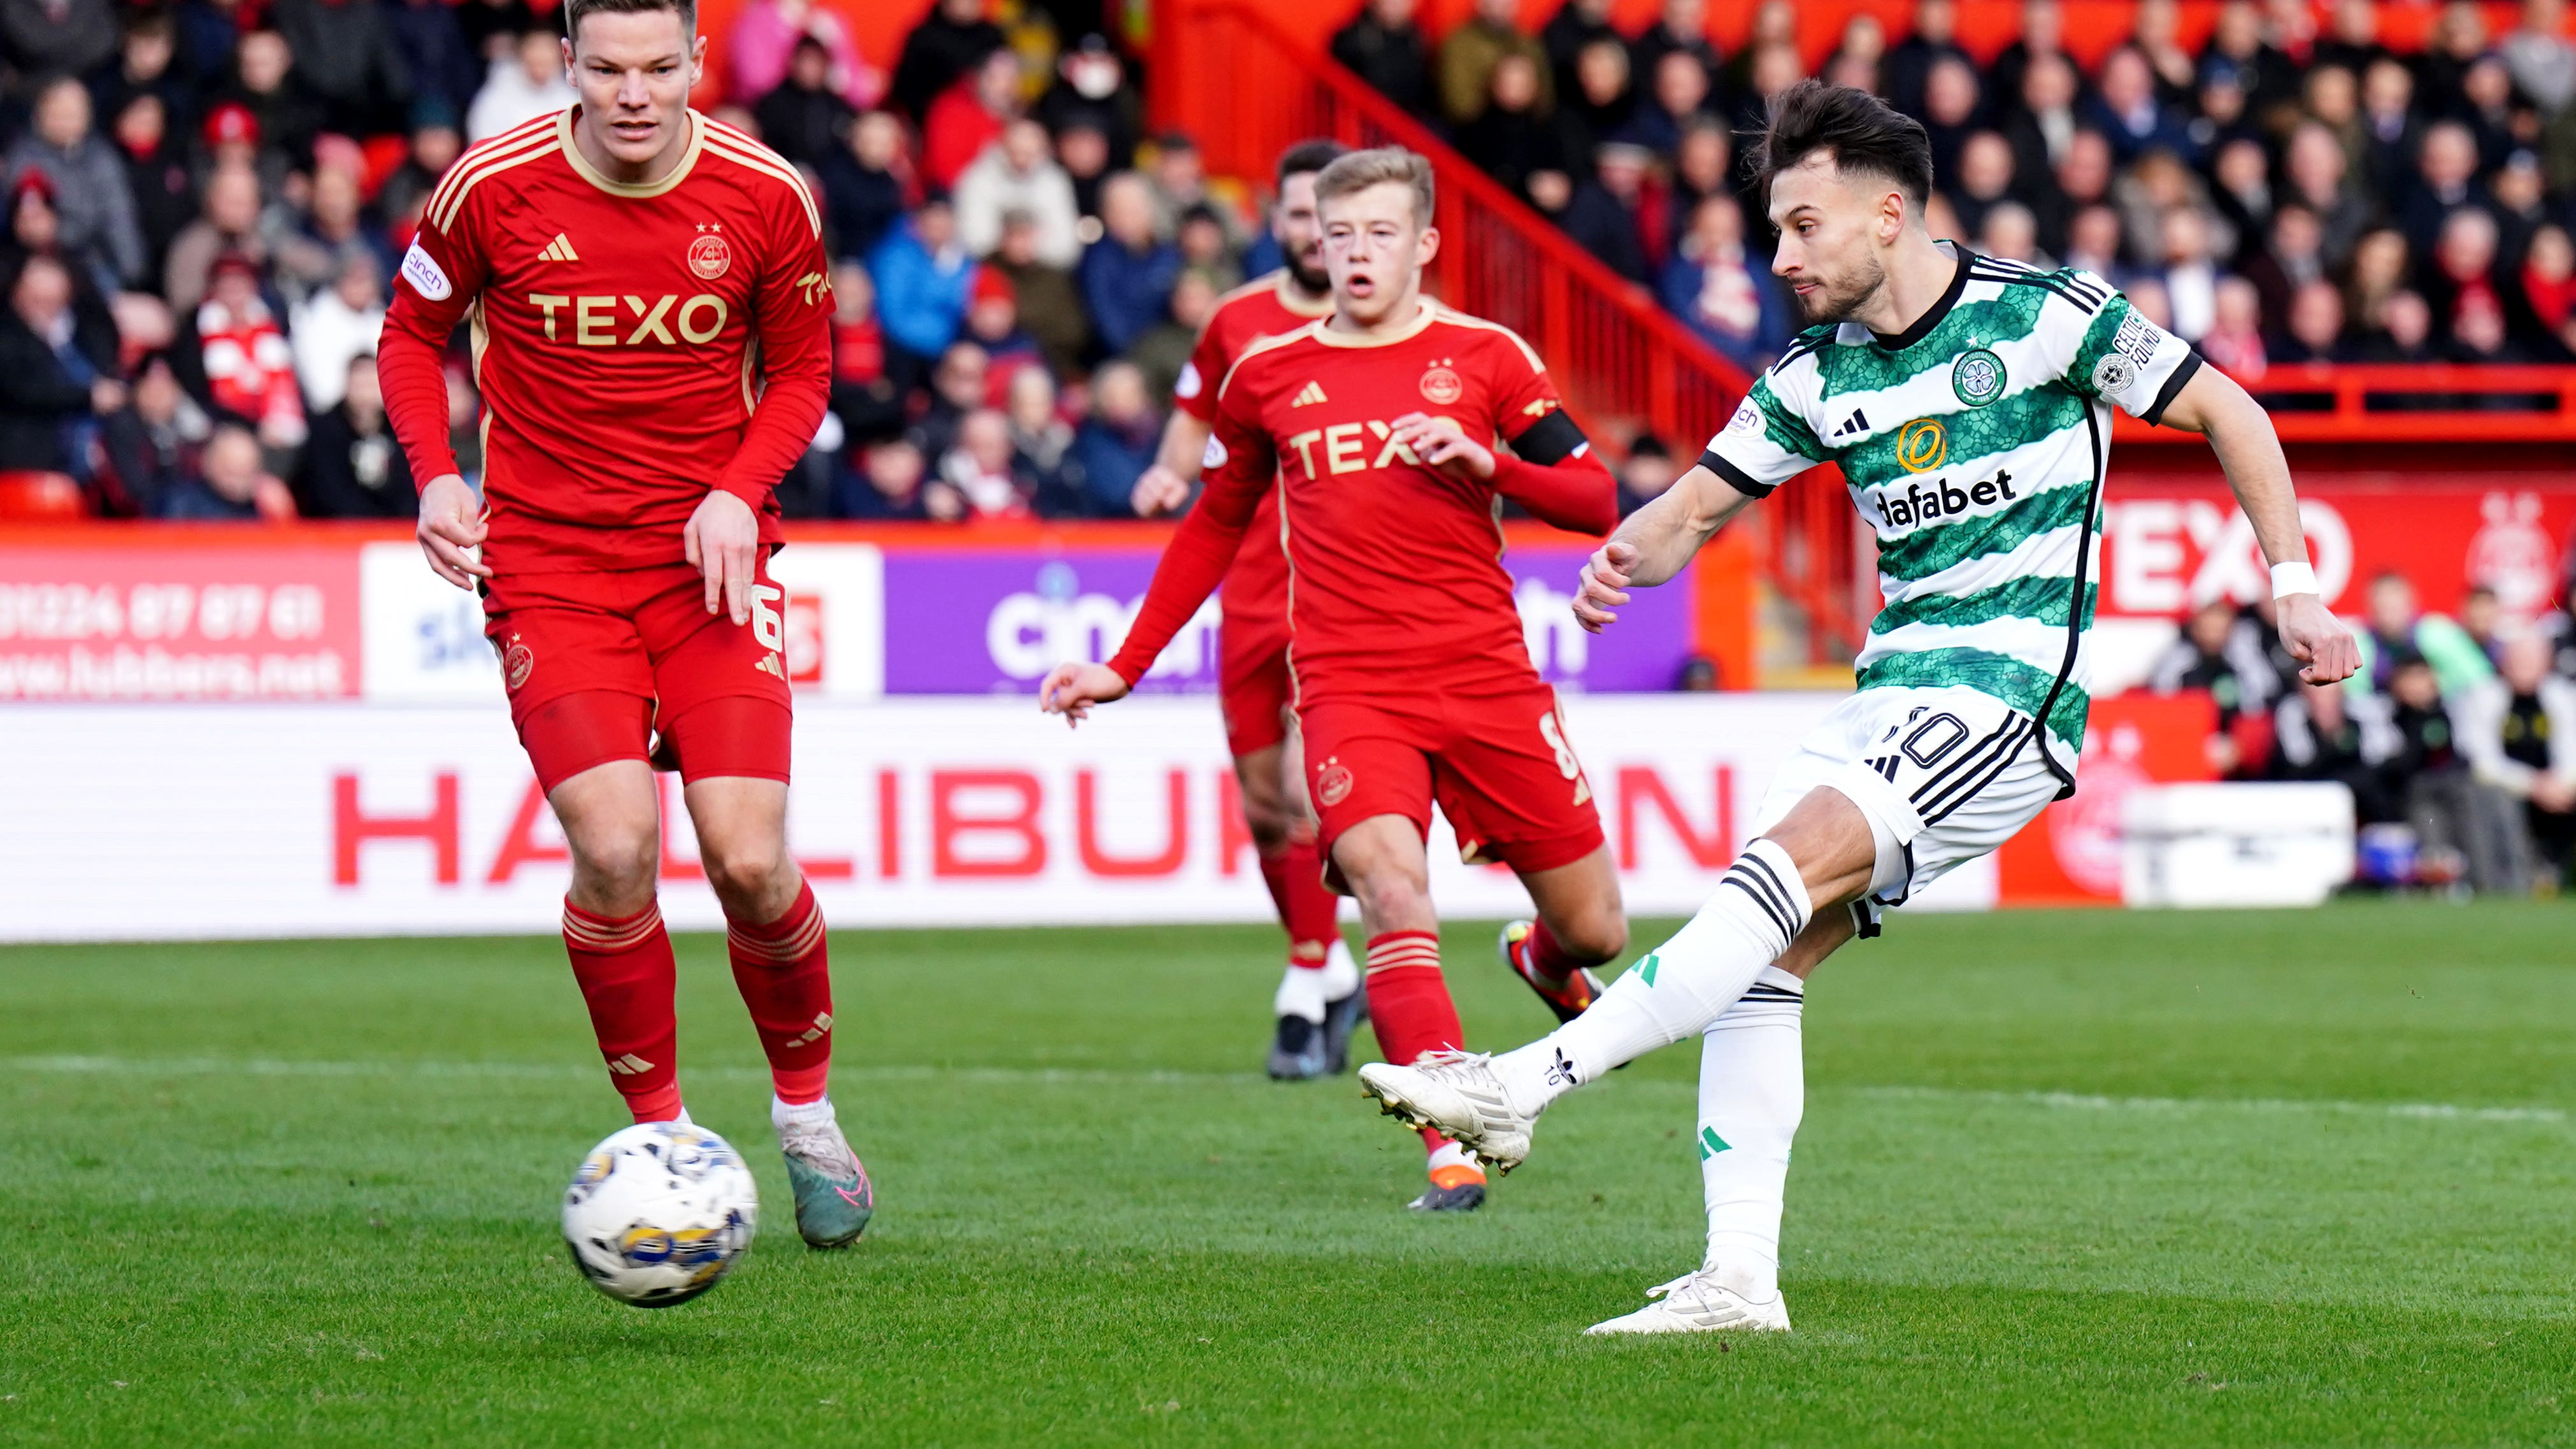 New signing Kuhn rescues point for Celtic as fans protest at transfer business